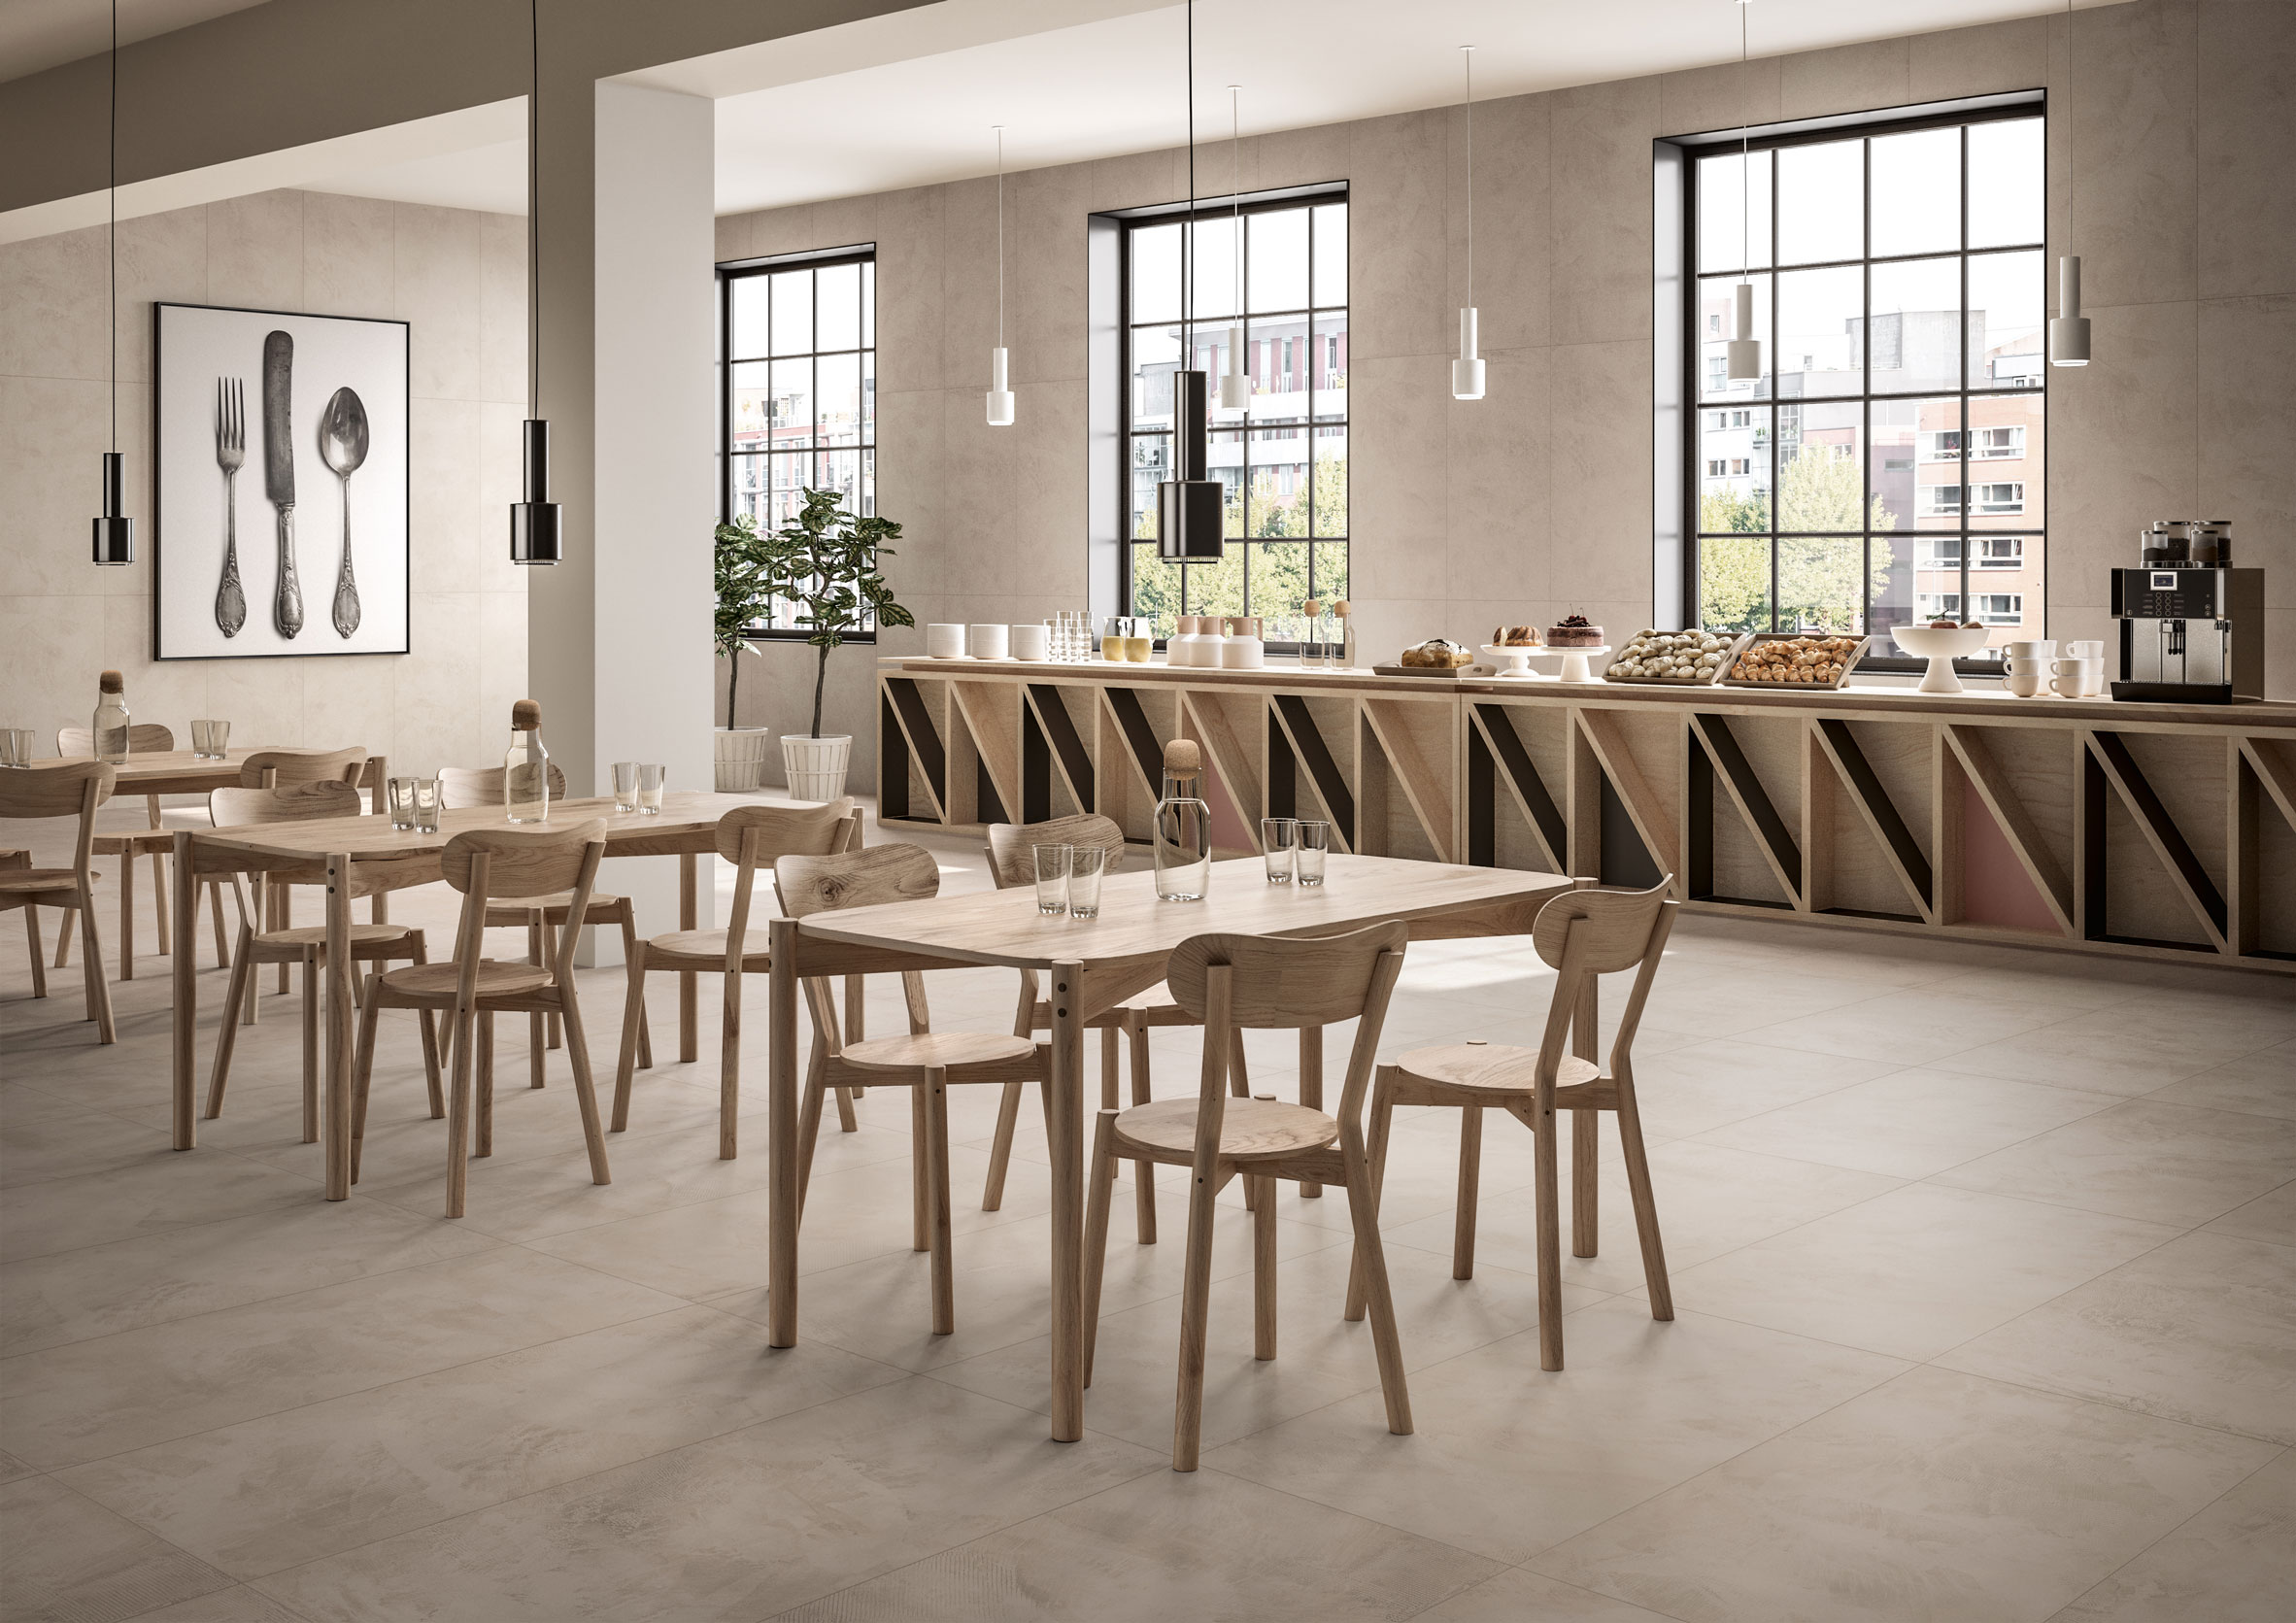 Ceramiche Refin launches Craft tiles influenced by hand-applied cement surfaces